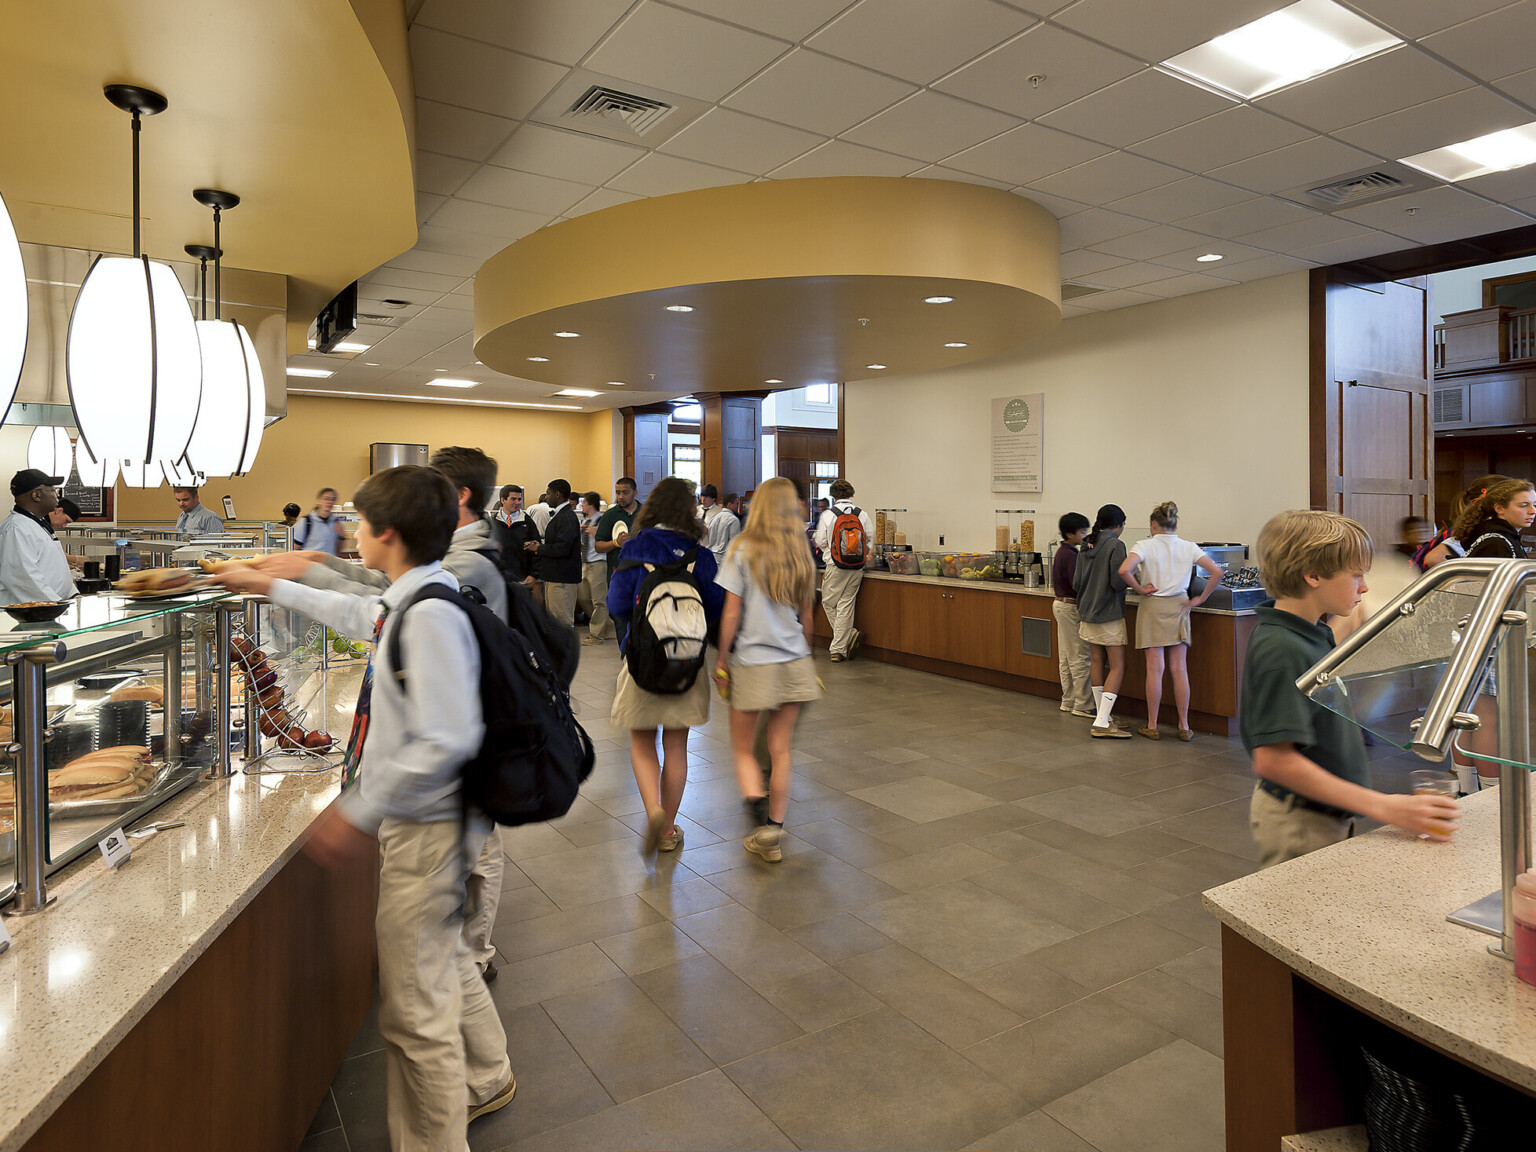 Students enjoy a sunny yellow, modern cafeteria designed for quick, casual dining, custom pendant lights, stone tile flooring